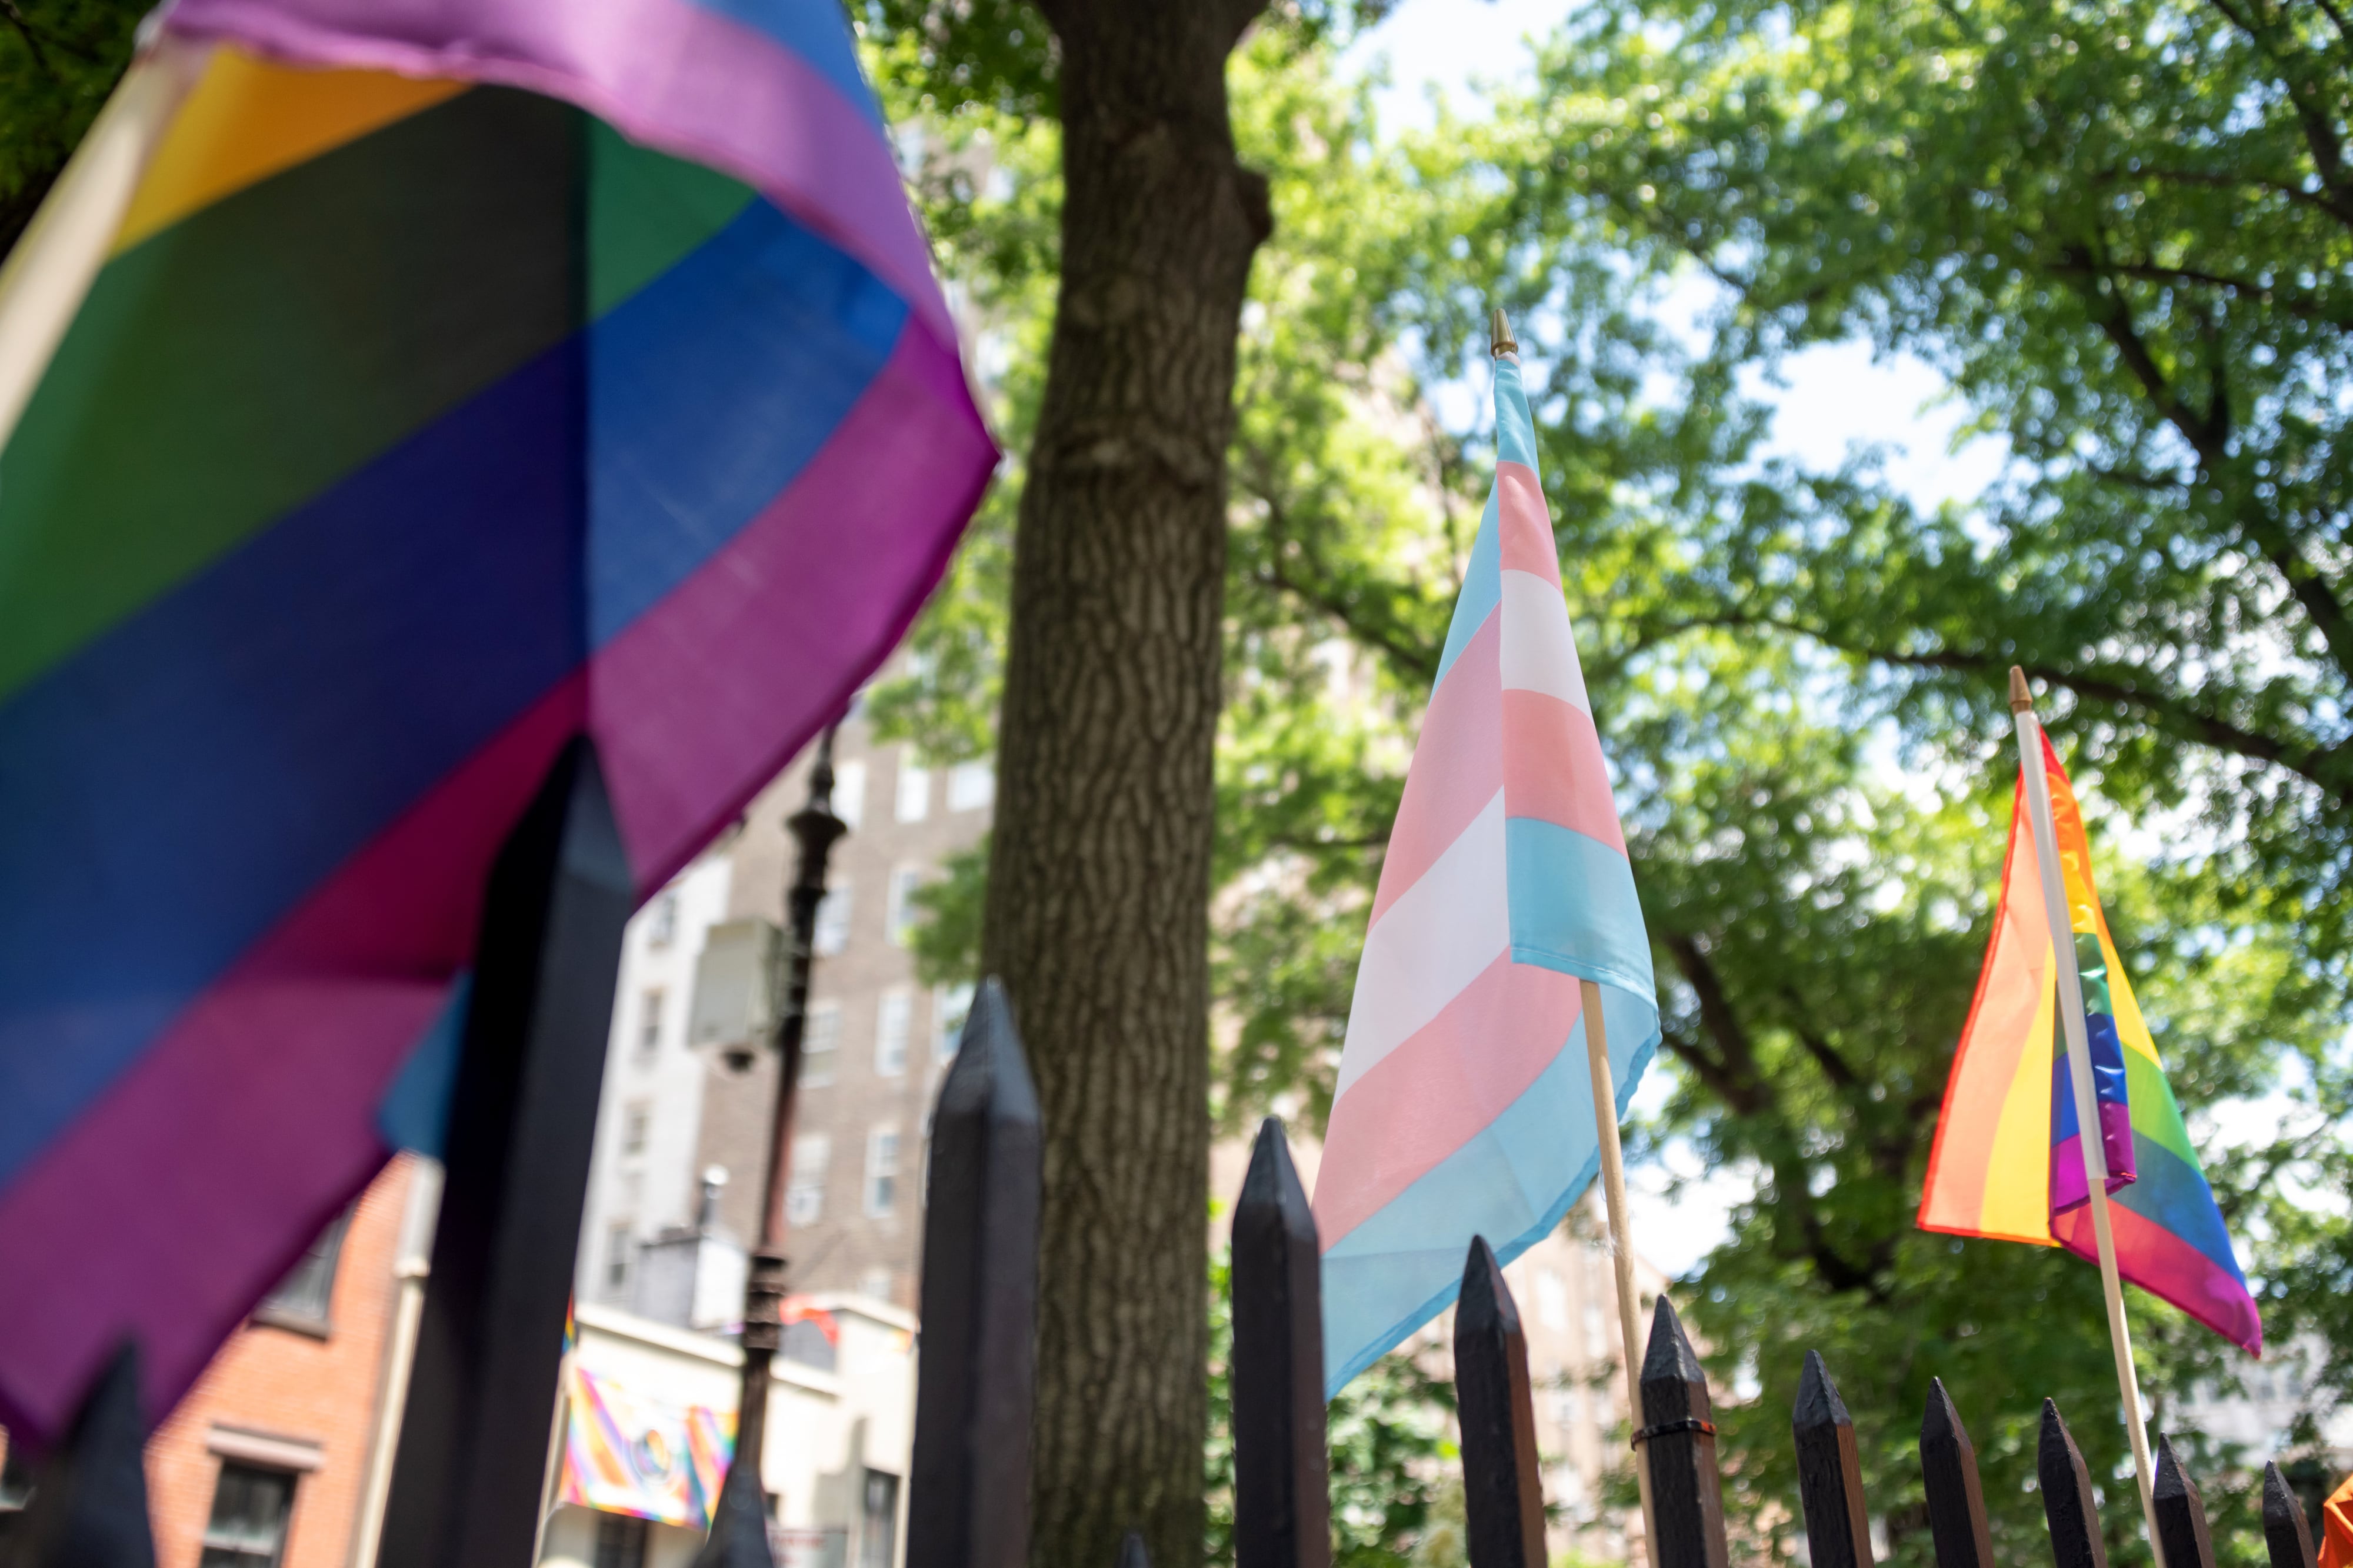 A blue, pink and white striped Transgender Pride flag hangs on a metal fence between two rainbow striped Pride flags.